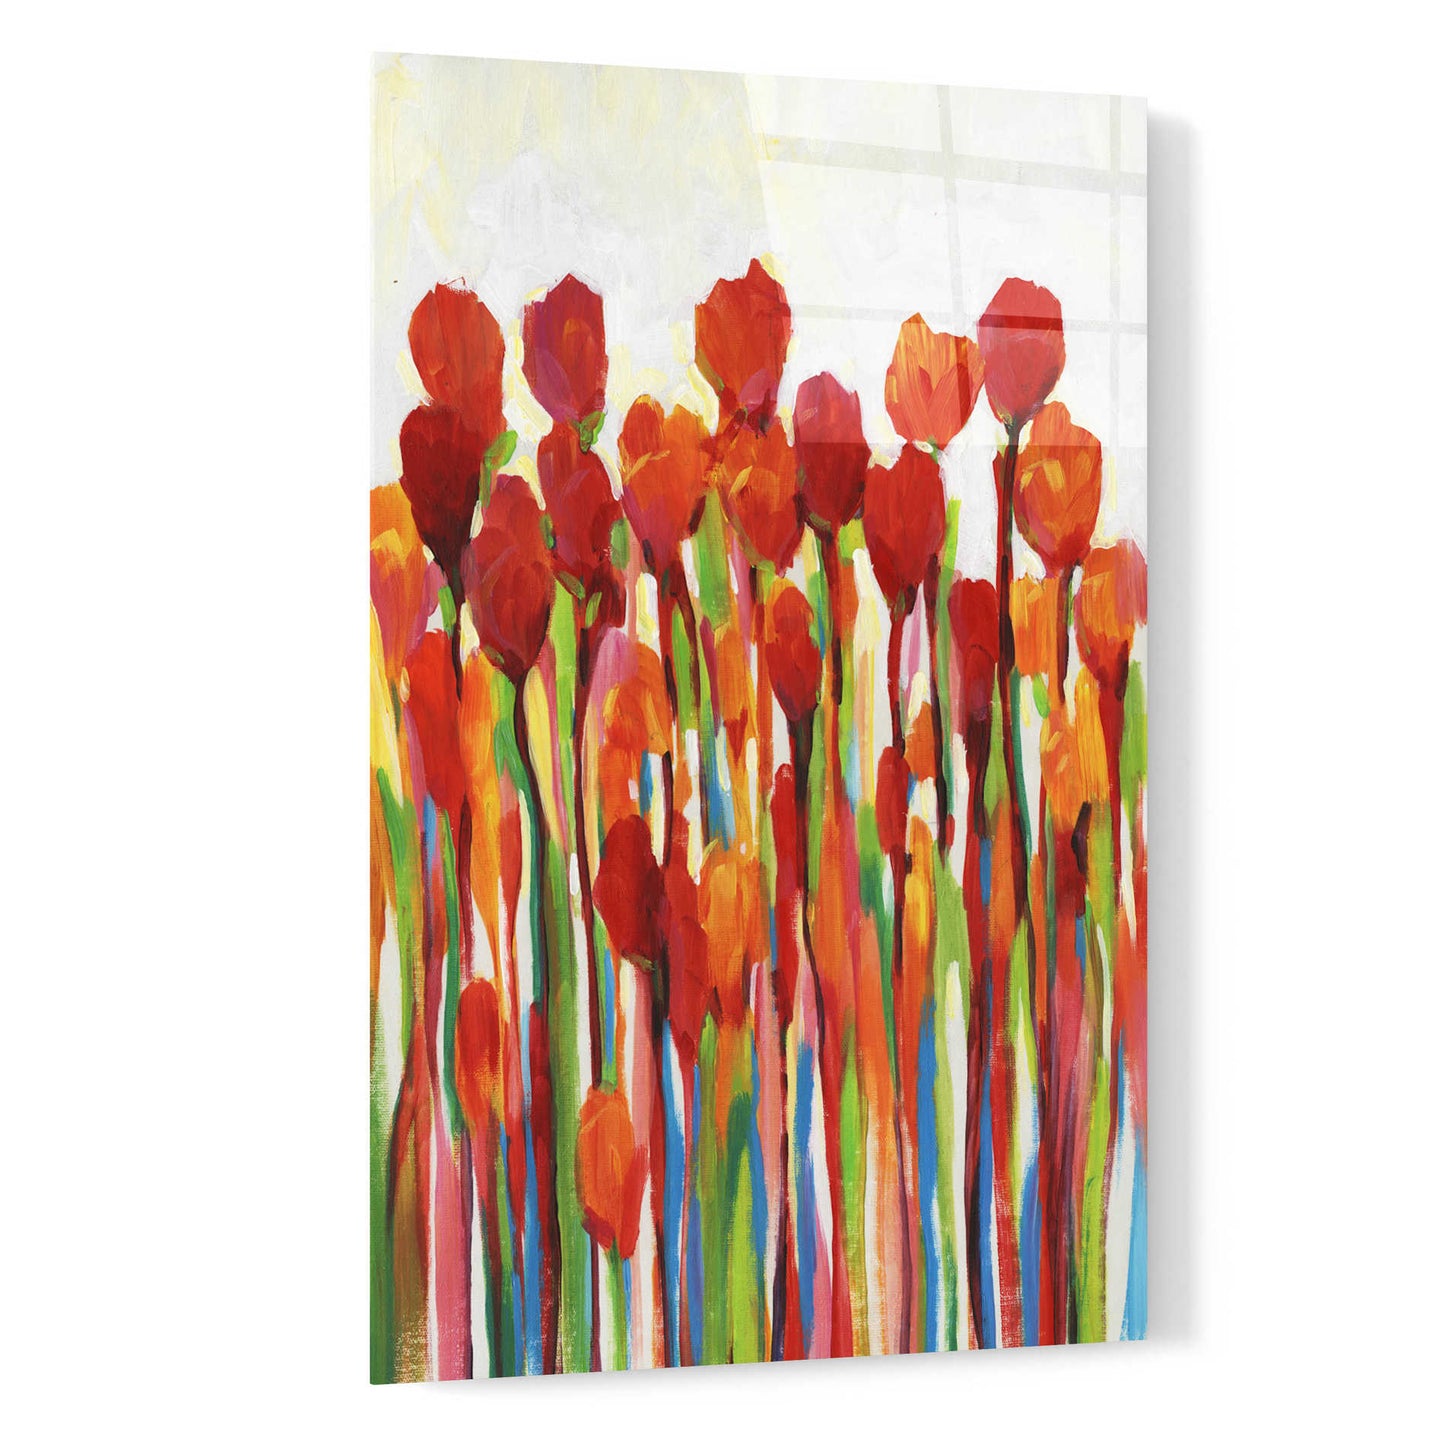 Epic Art 'Bursting with Color II' by Tim O'Toole, Acrylic Glass Wall Art,16x24